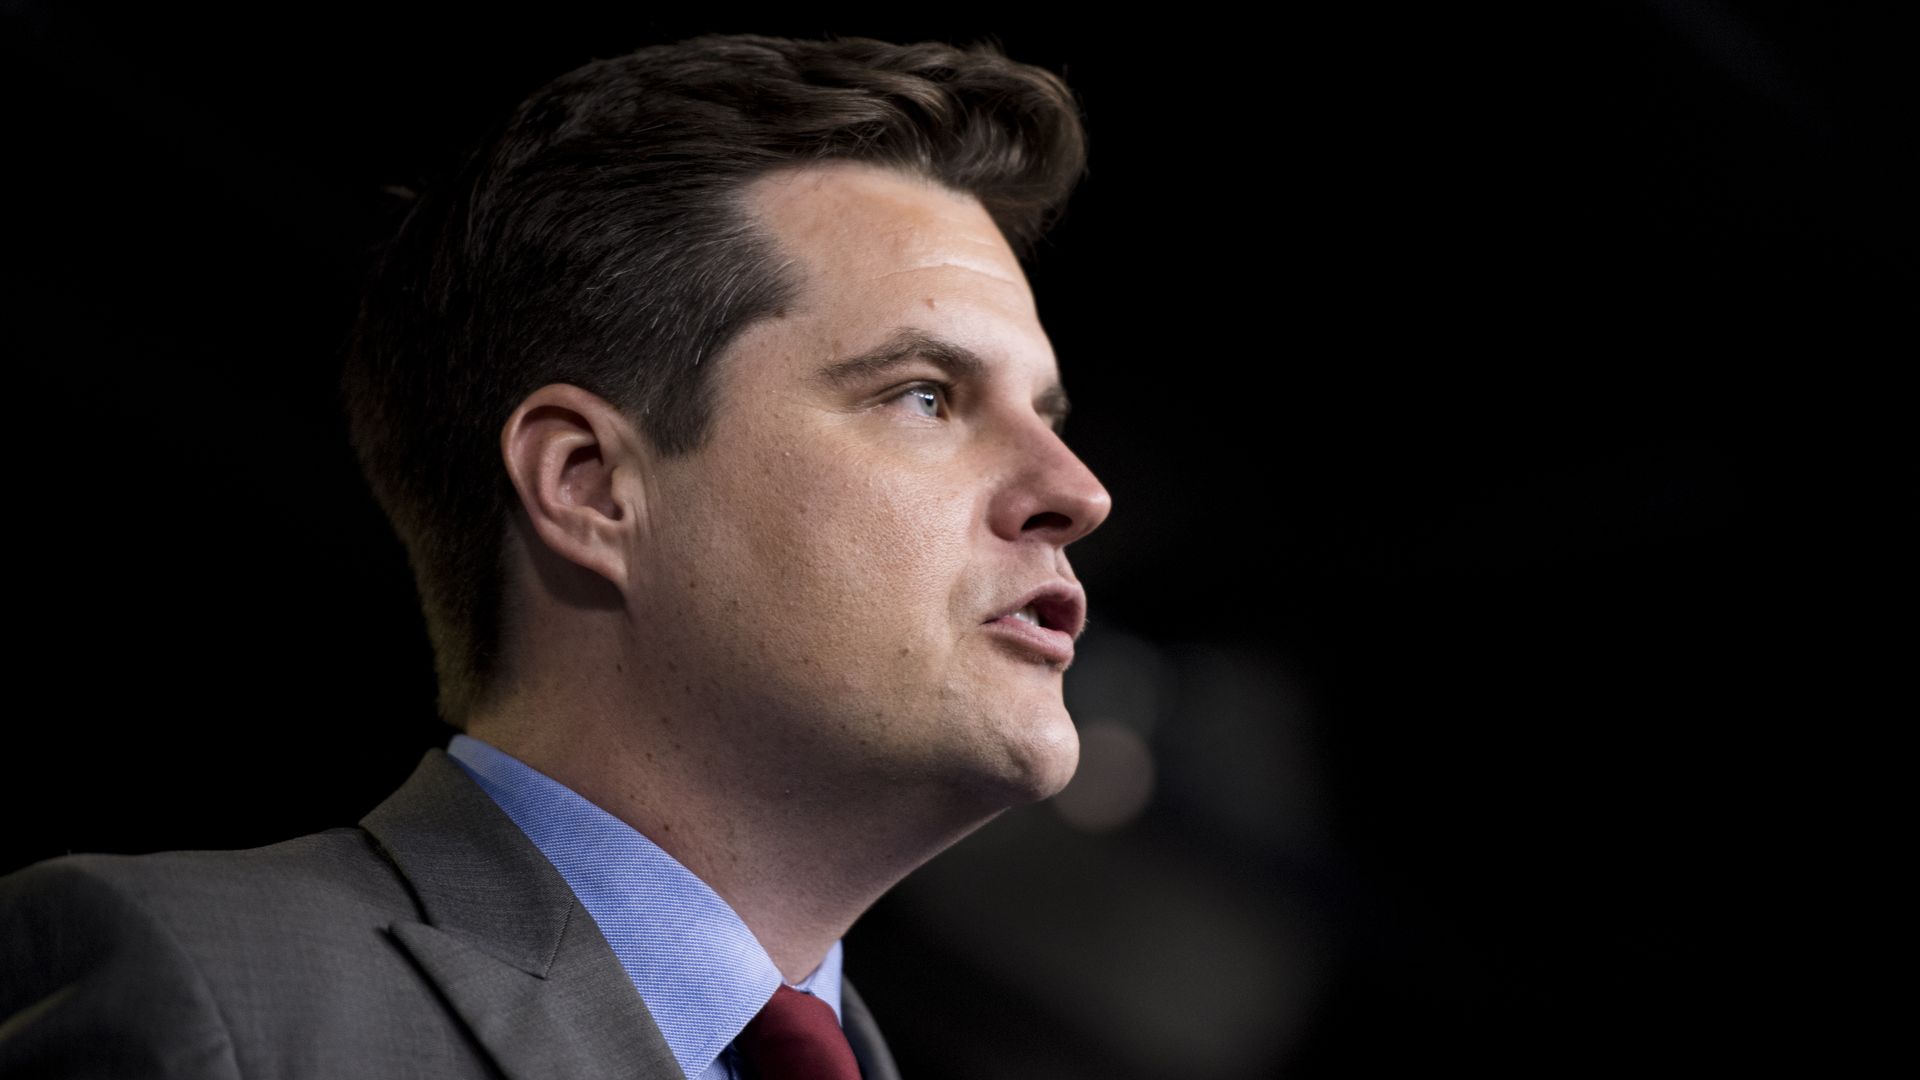 In this image, Gaetz stands and looks to the right while speaking.